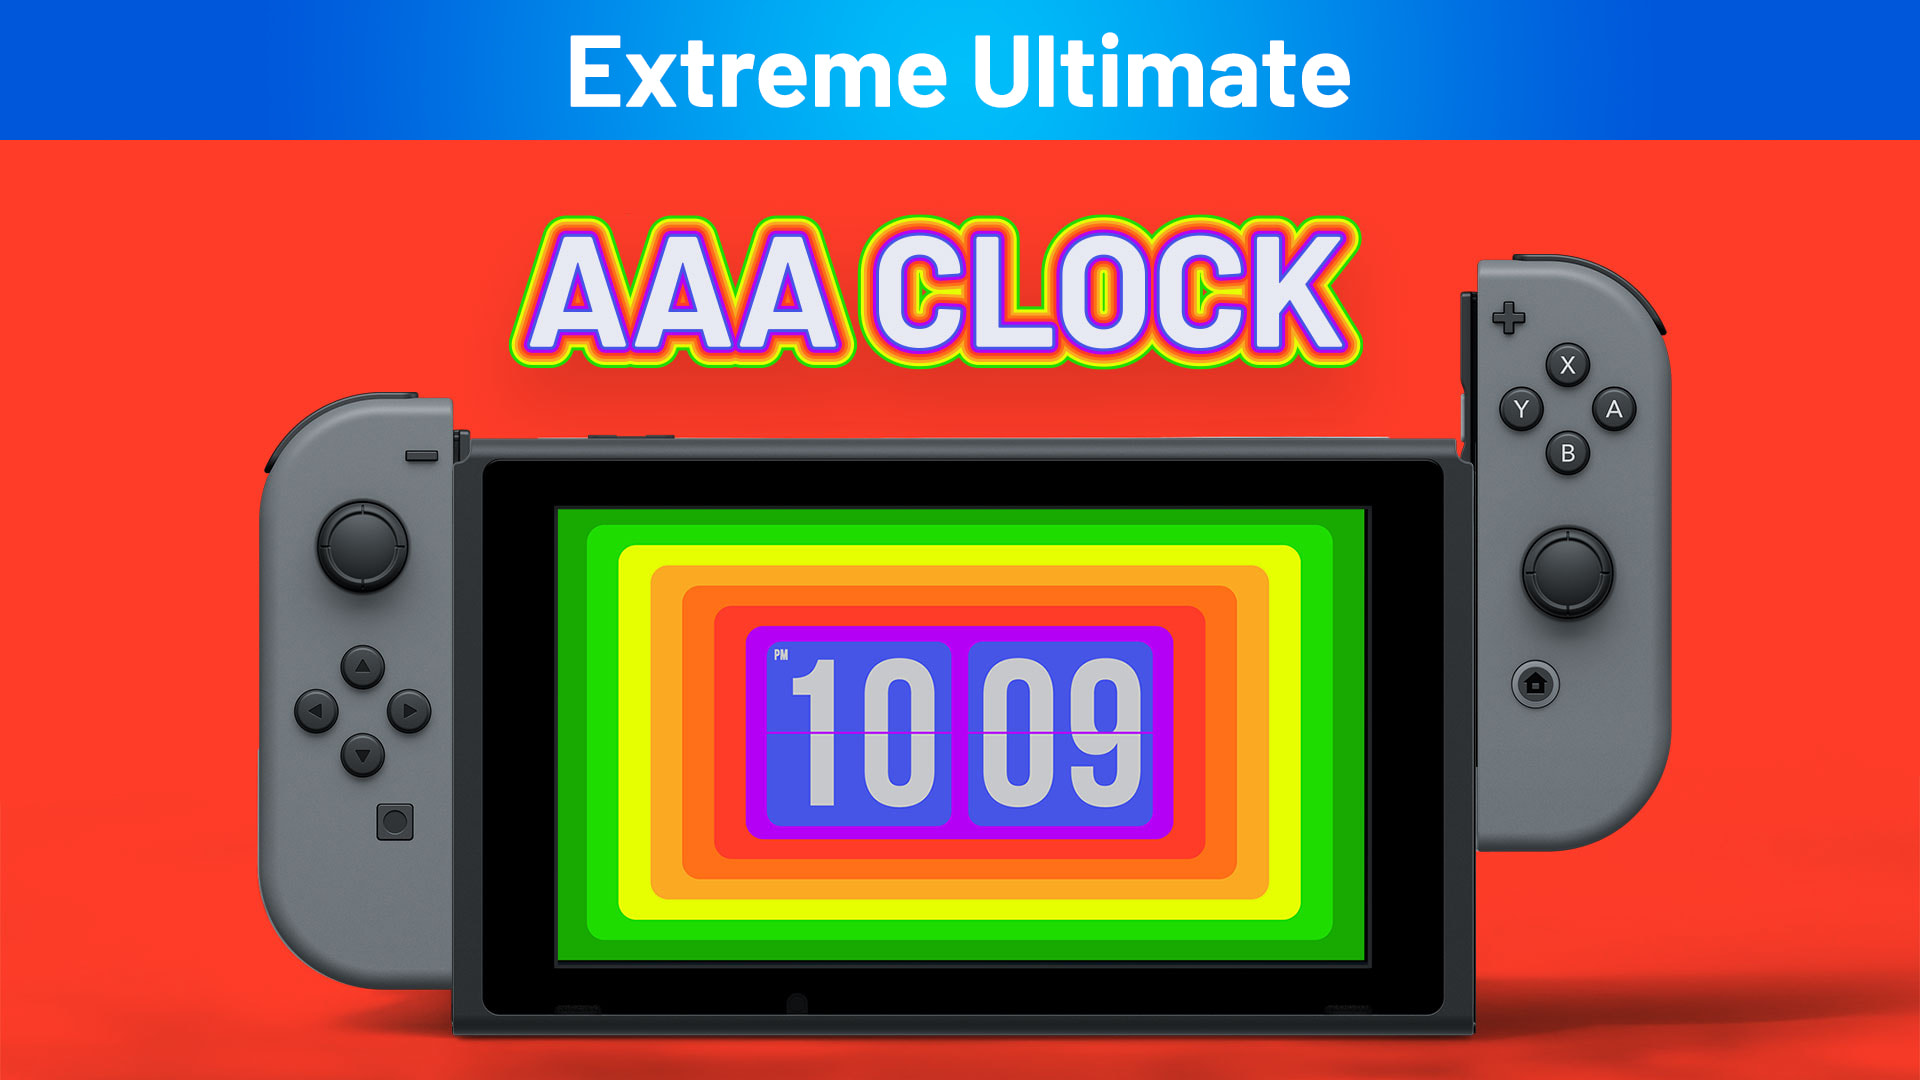 AAA Clock Extreme Ultimate